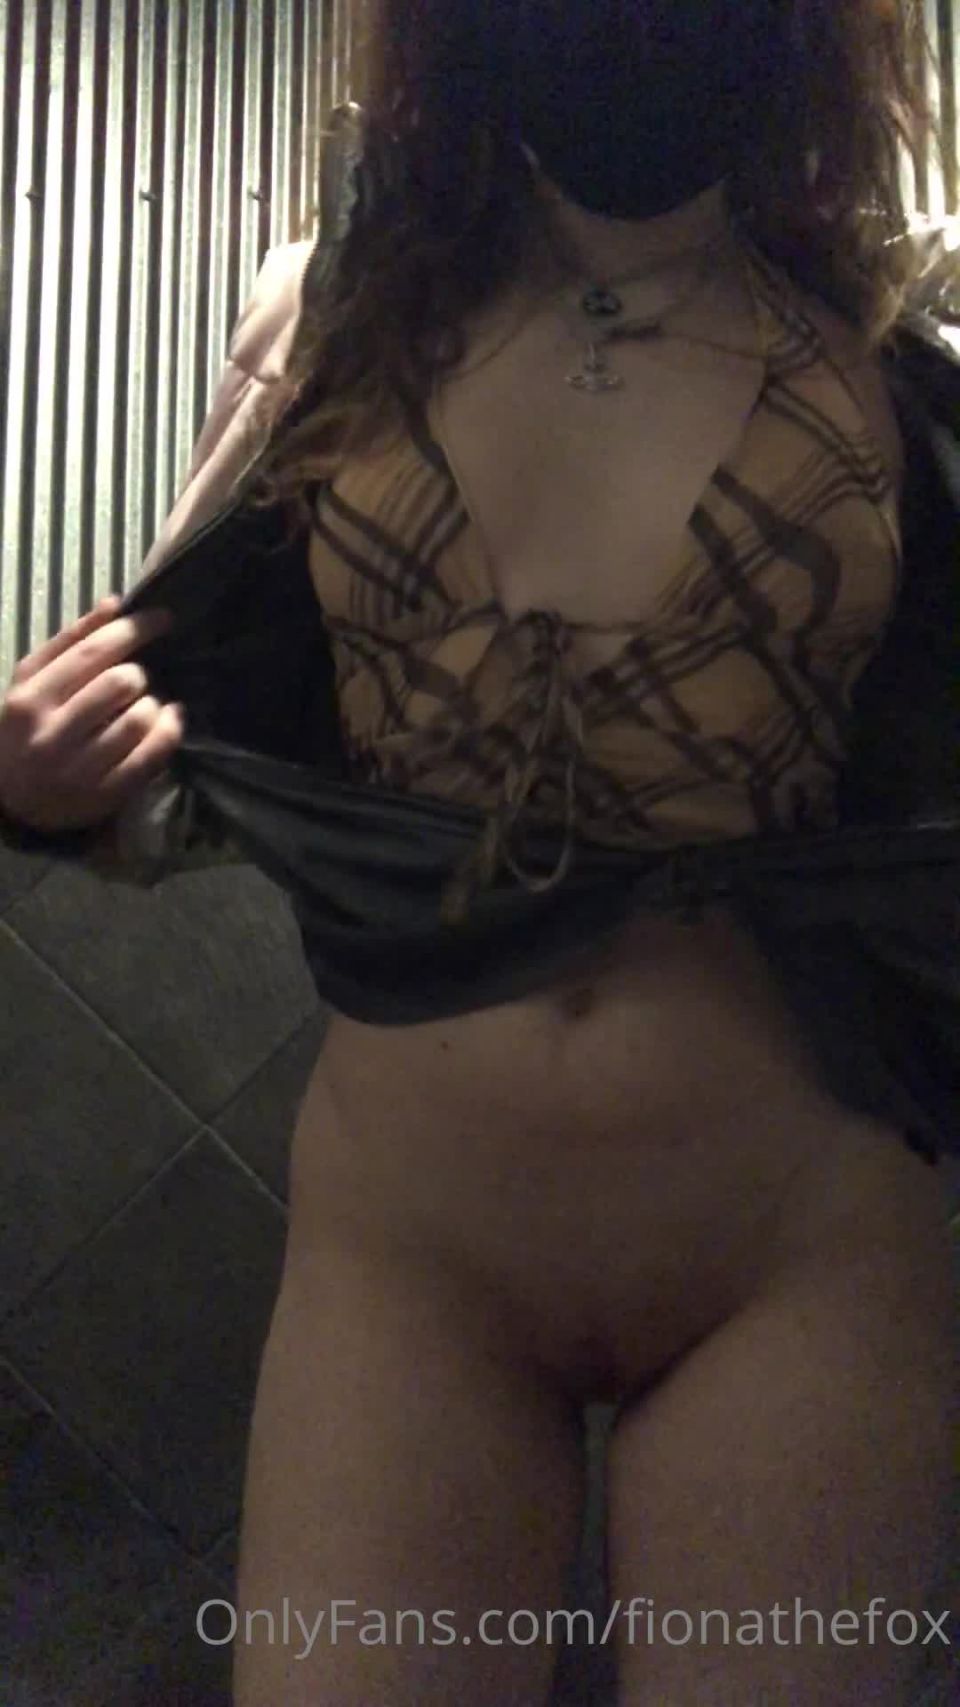 Fiona The Fox () Fionathefox - naughty public flash filmed a lil clip for you guys when i went out last night 07-03-2021